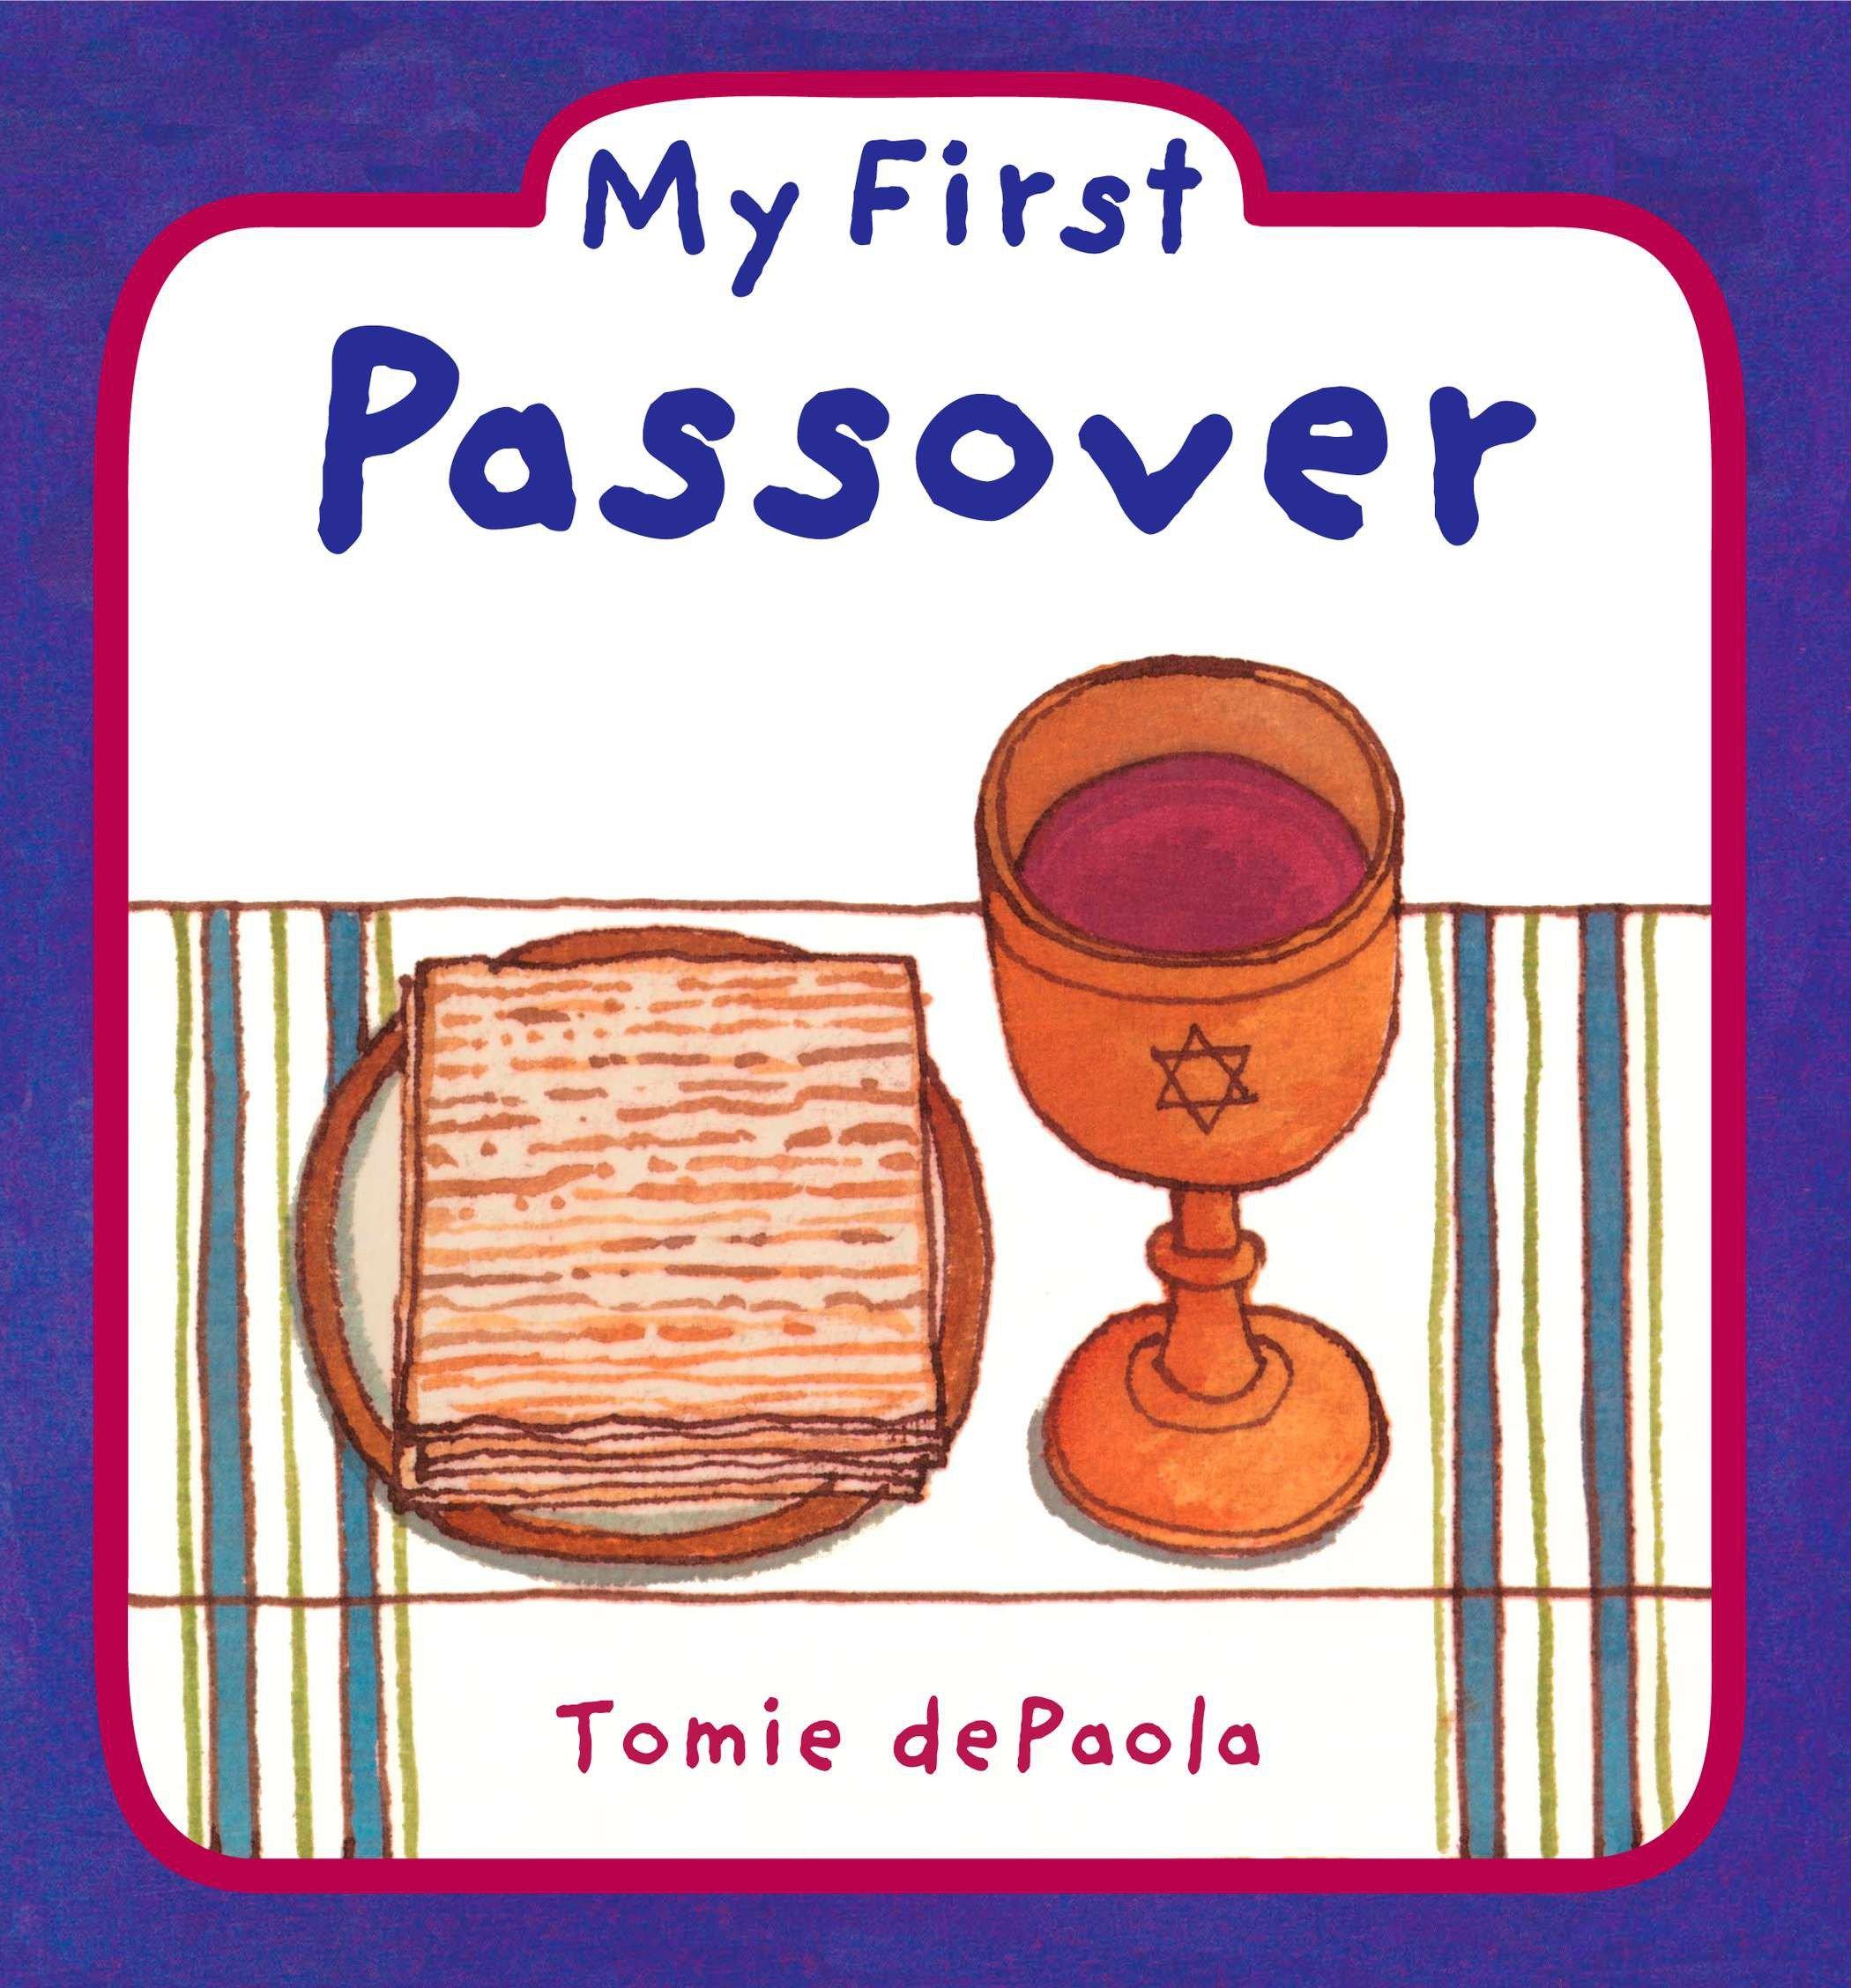 My First Passover - Tomie dePaola